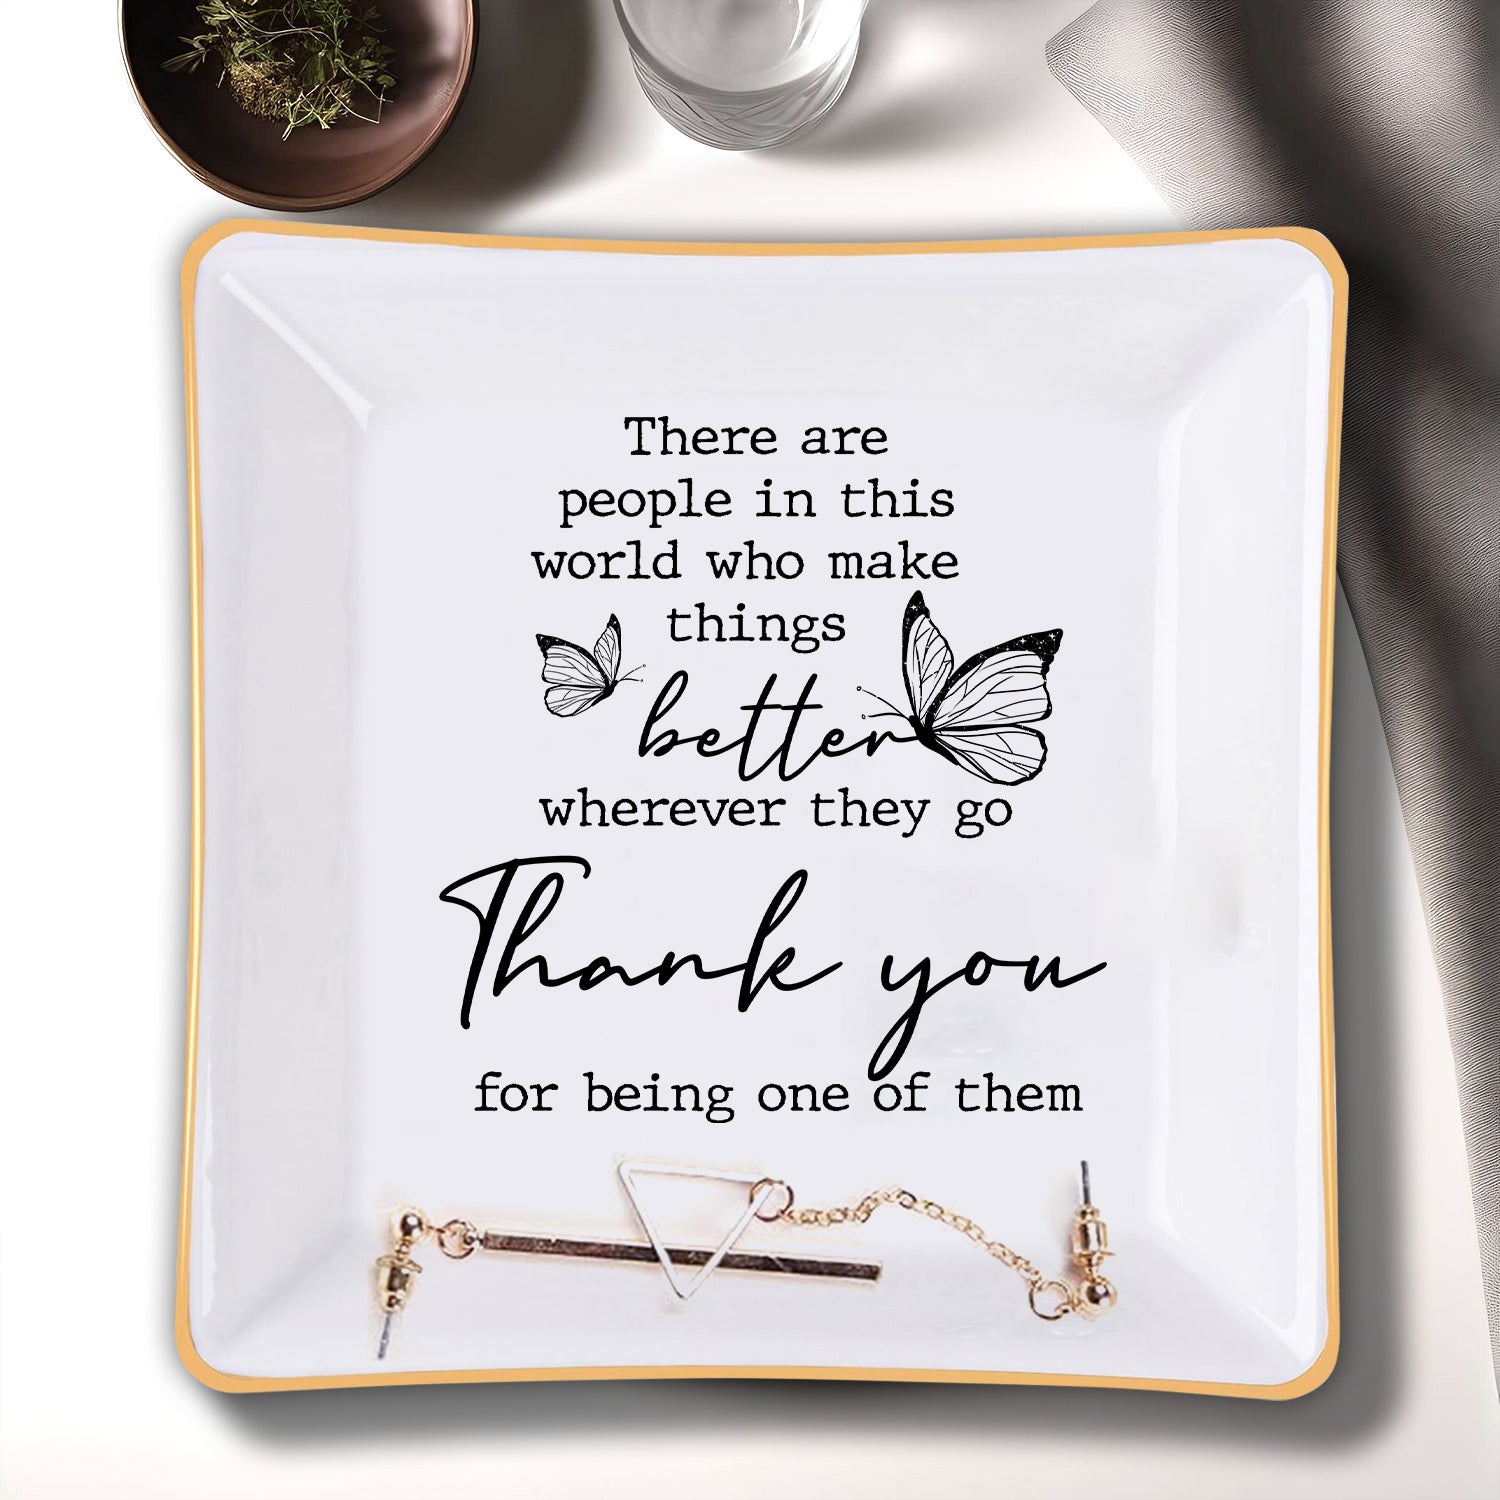 Thank You For Being One Of Them Christian Gift Inspirational Religious Gift Ceramic Ring Dish